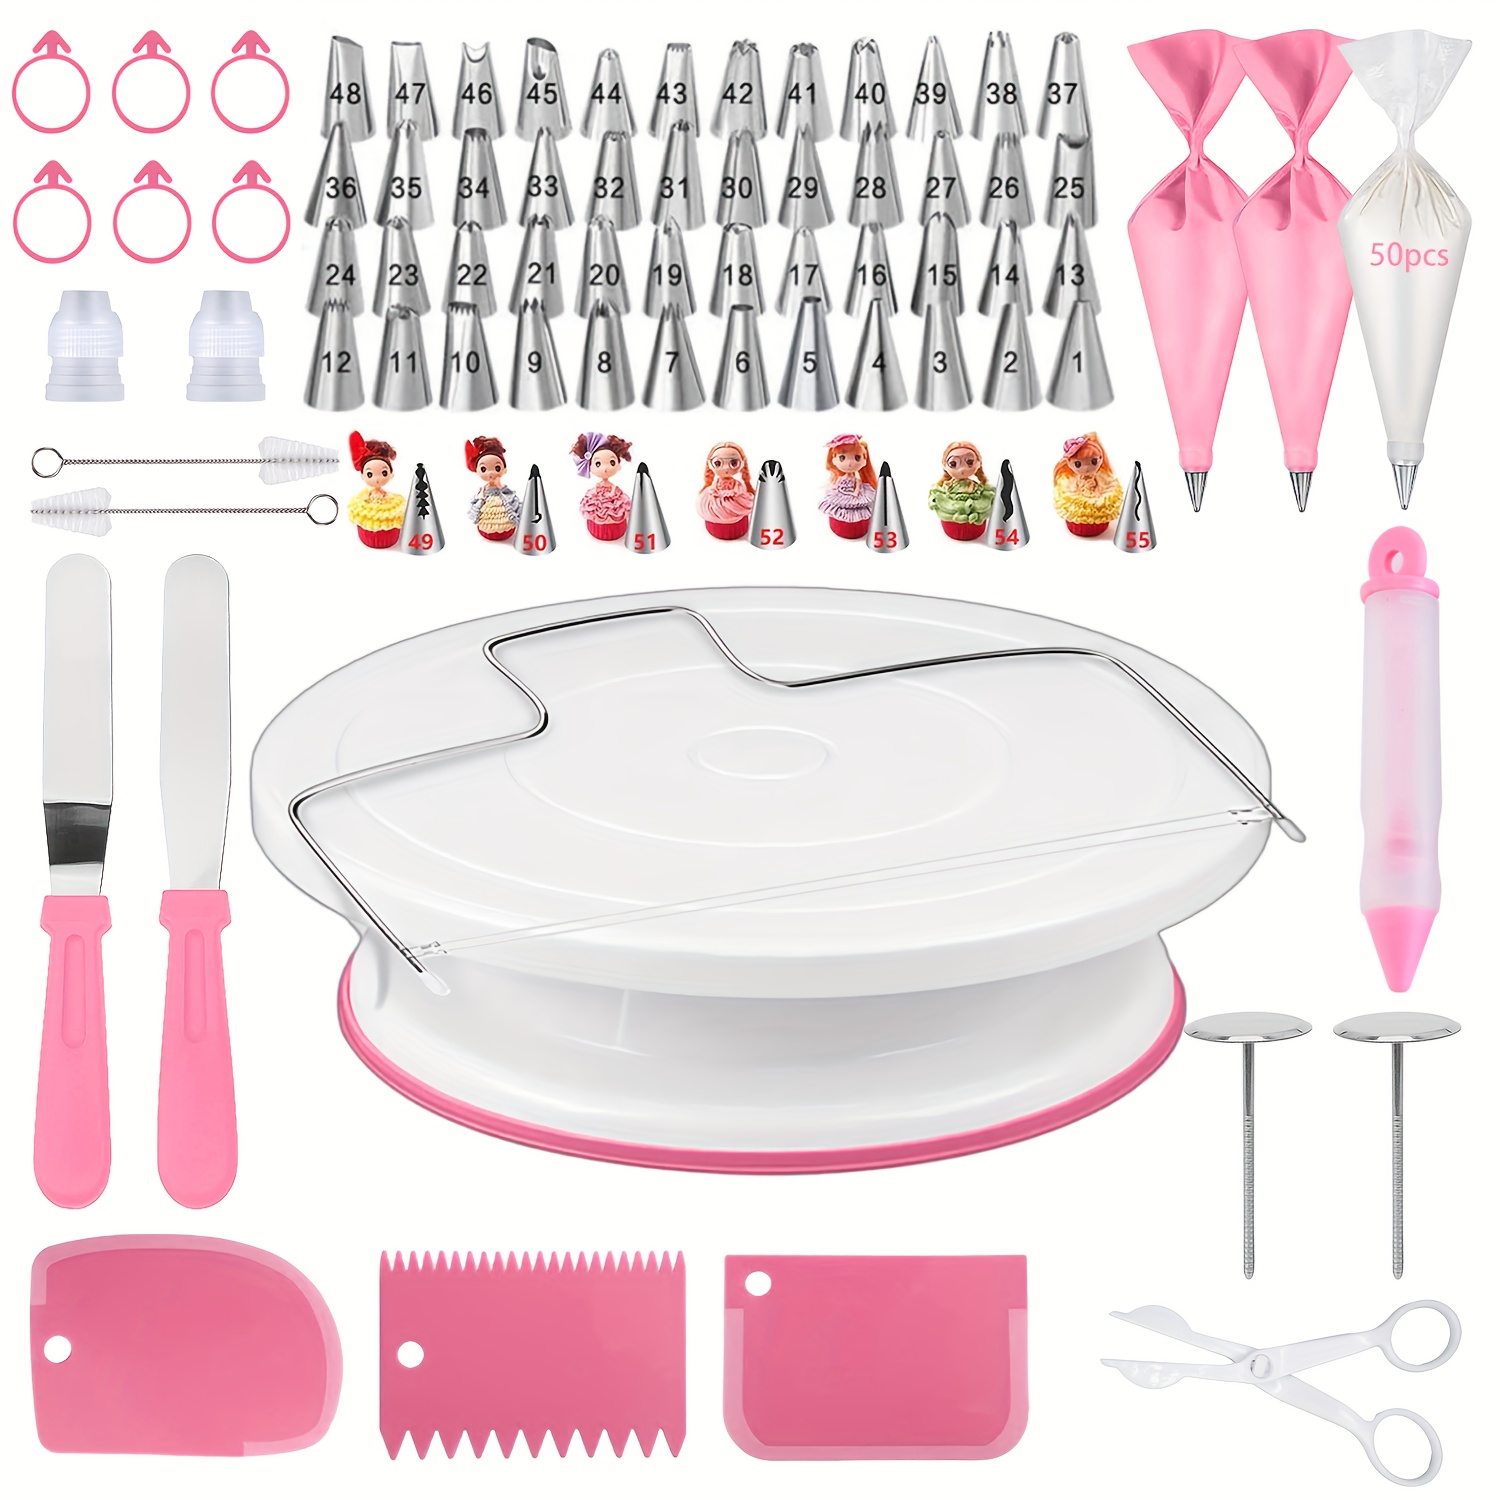 

128pcs, Cake Decorating Tool Kit, For Beginners And Professionals Diy Cake Making, Cookie Making, Baking Tools, Kitchen Accessories